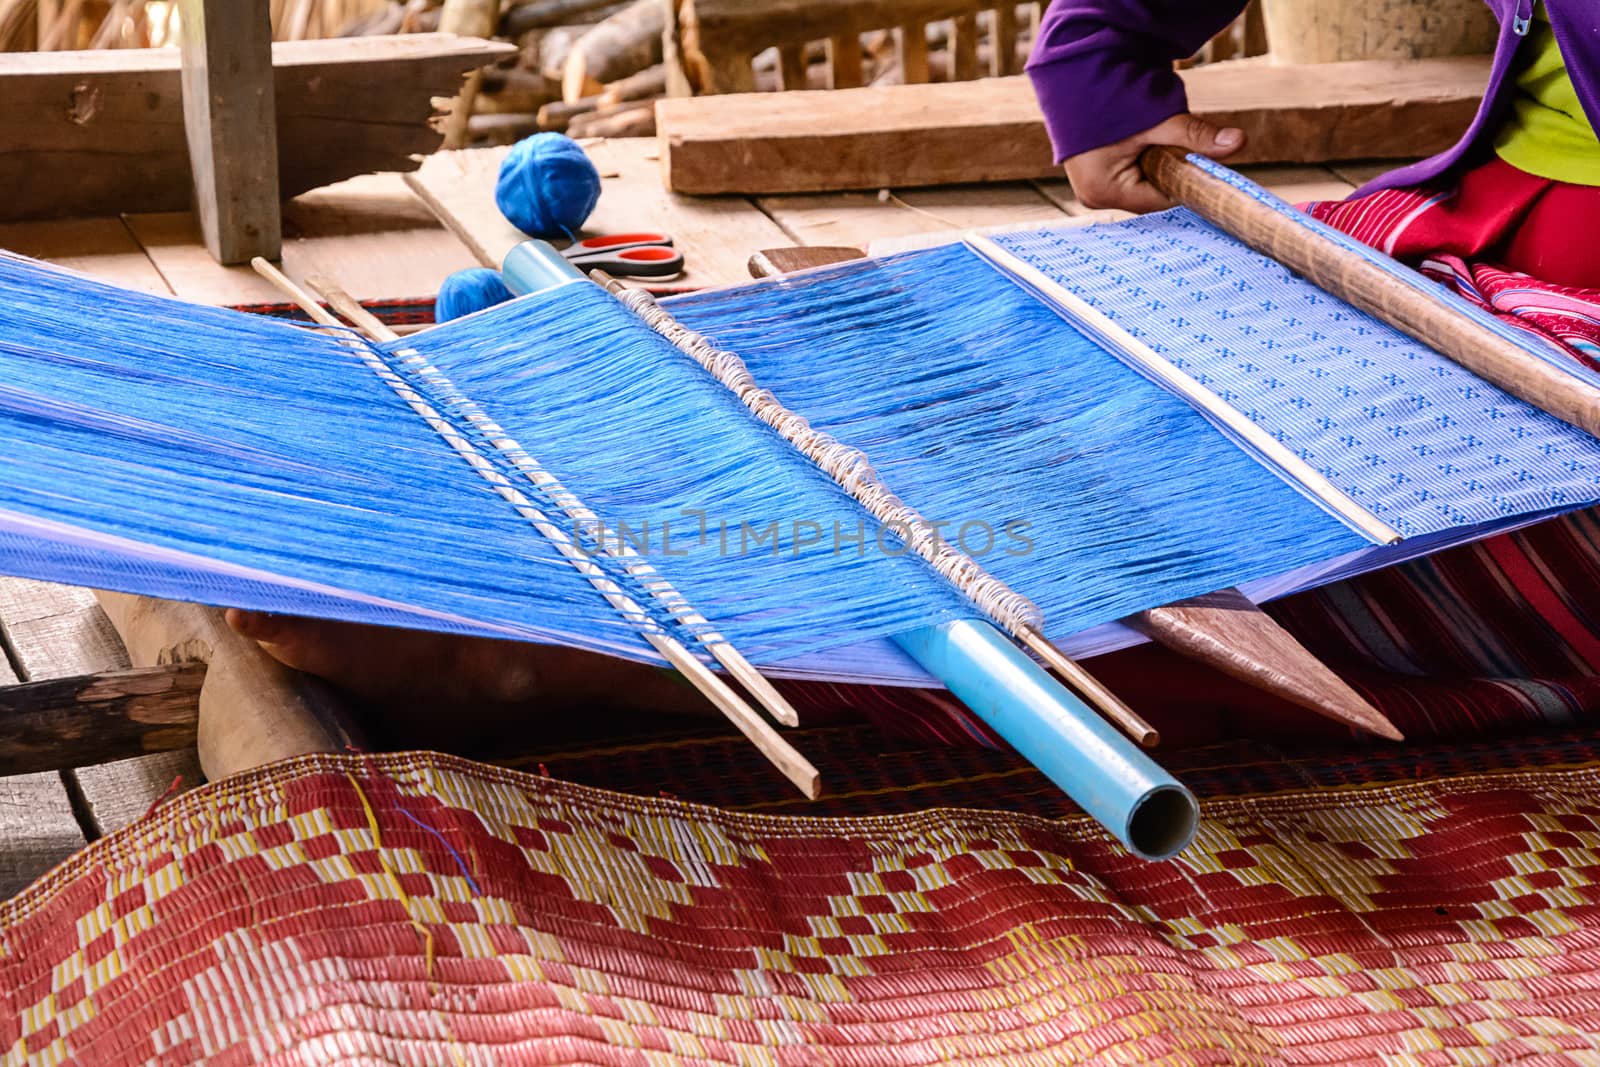 Fabric weaving tools is one of traditional manufacturing